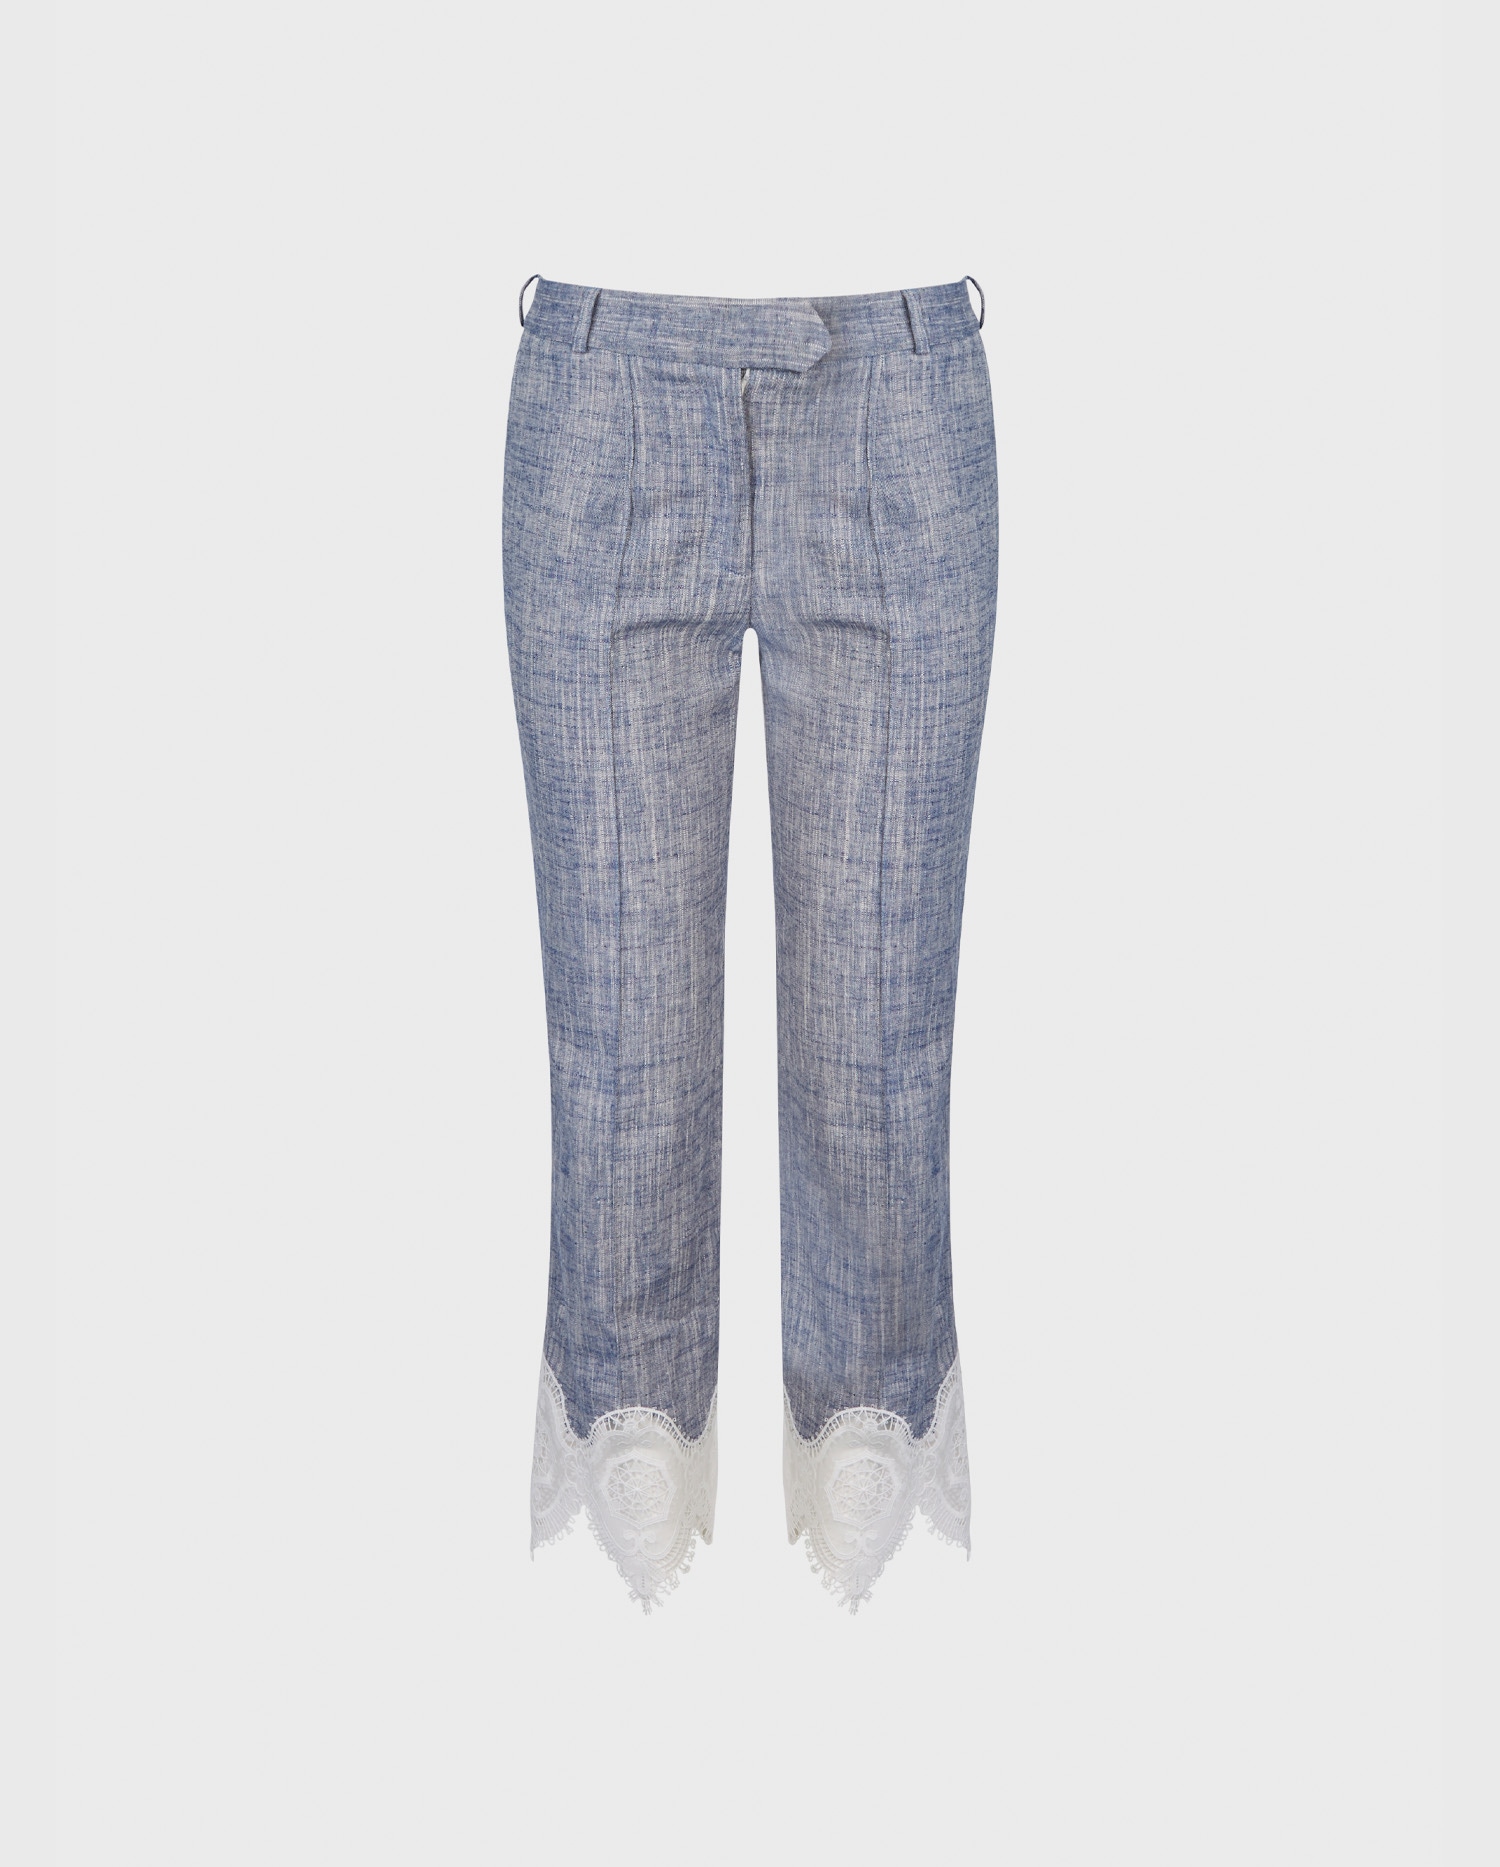 Explore the Vince blue chambray cropped pants enhanced with lace applique at cuff with pockets,  belt loops and concealed tab closure